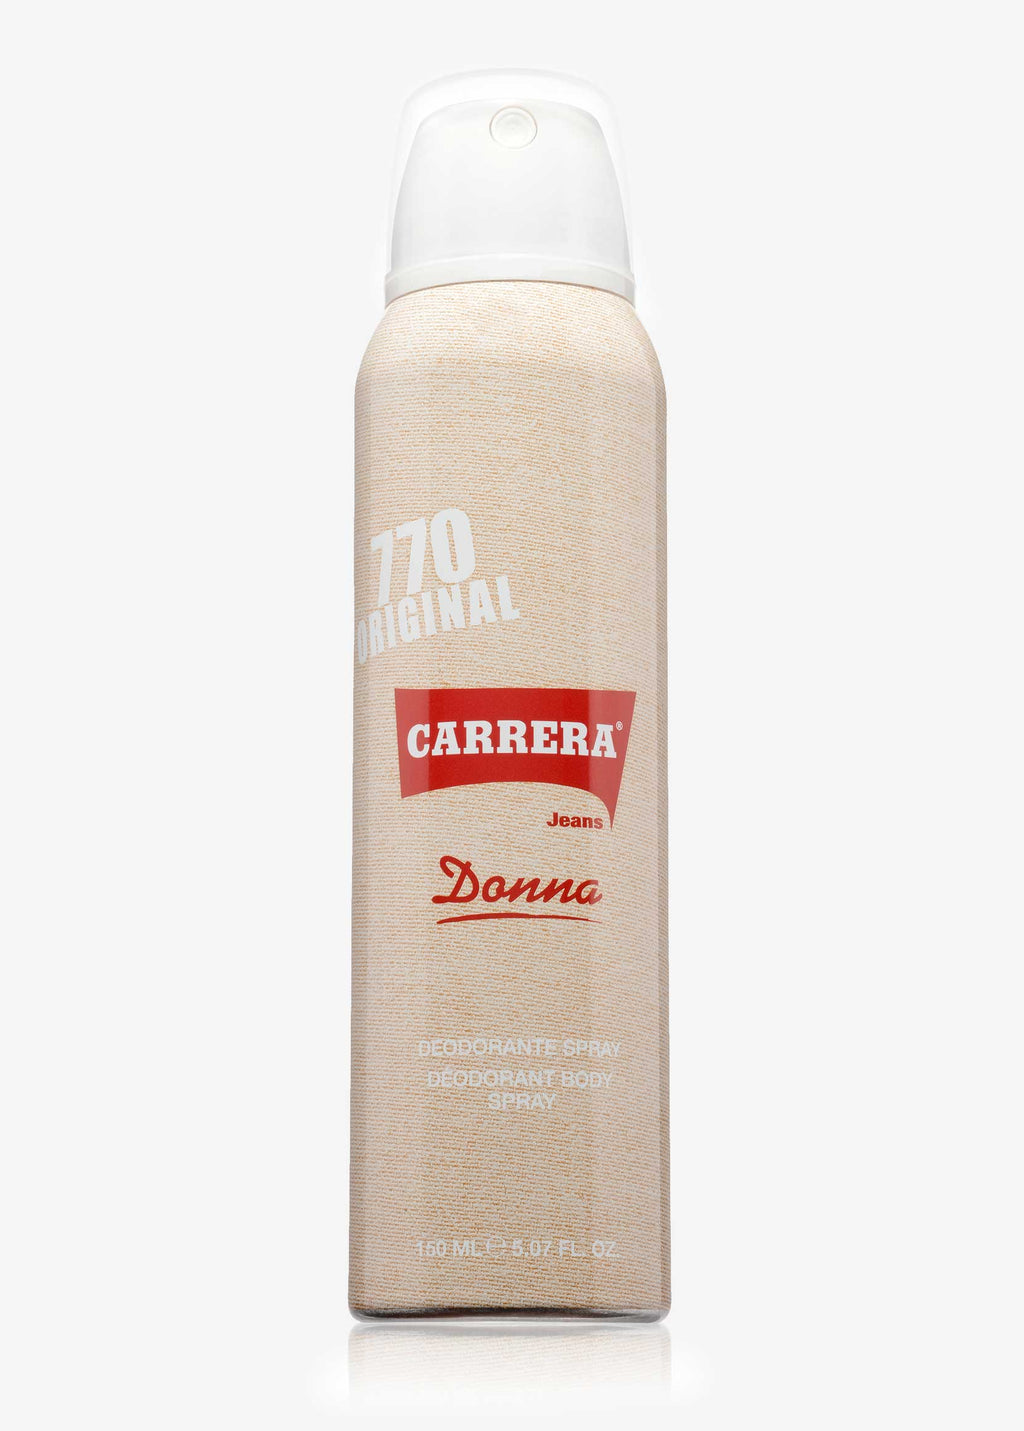 Carrera Jeans Original Fragrance and Body Products OFFICIAL SITE.